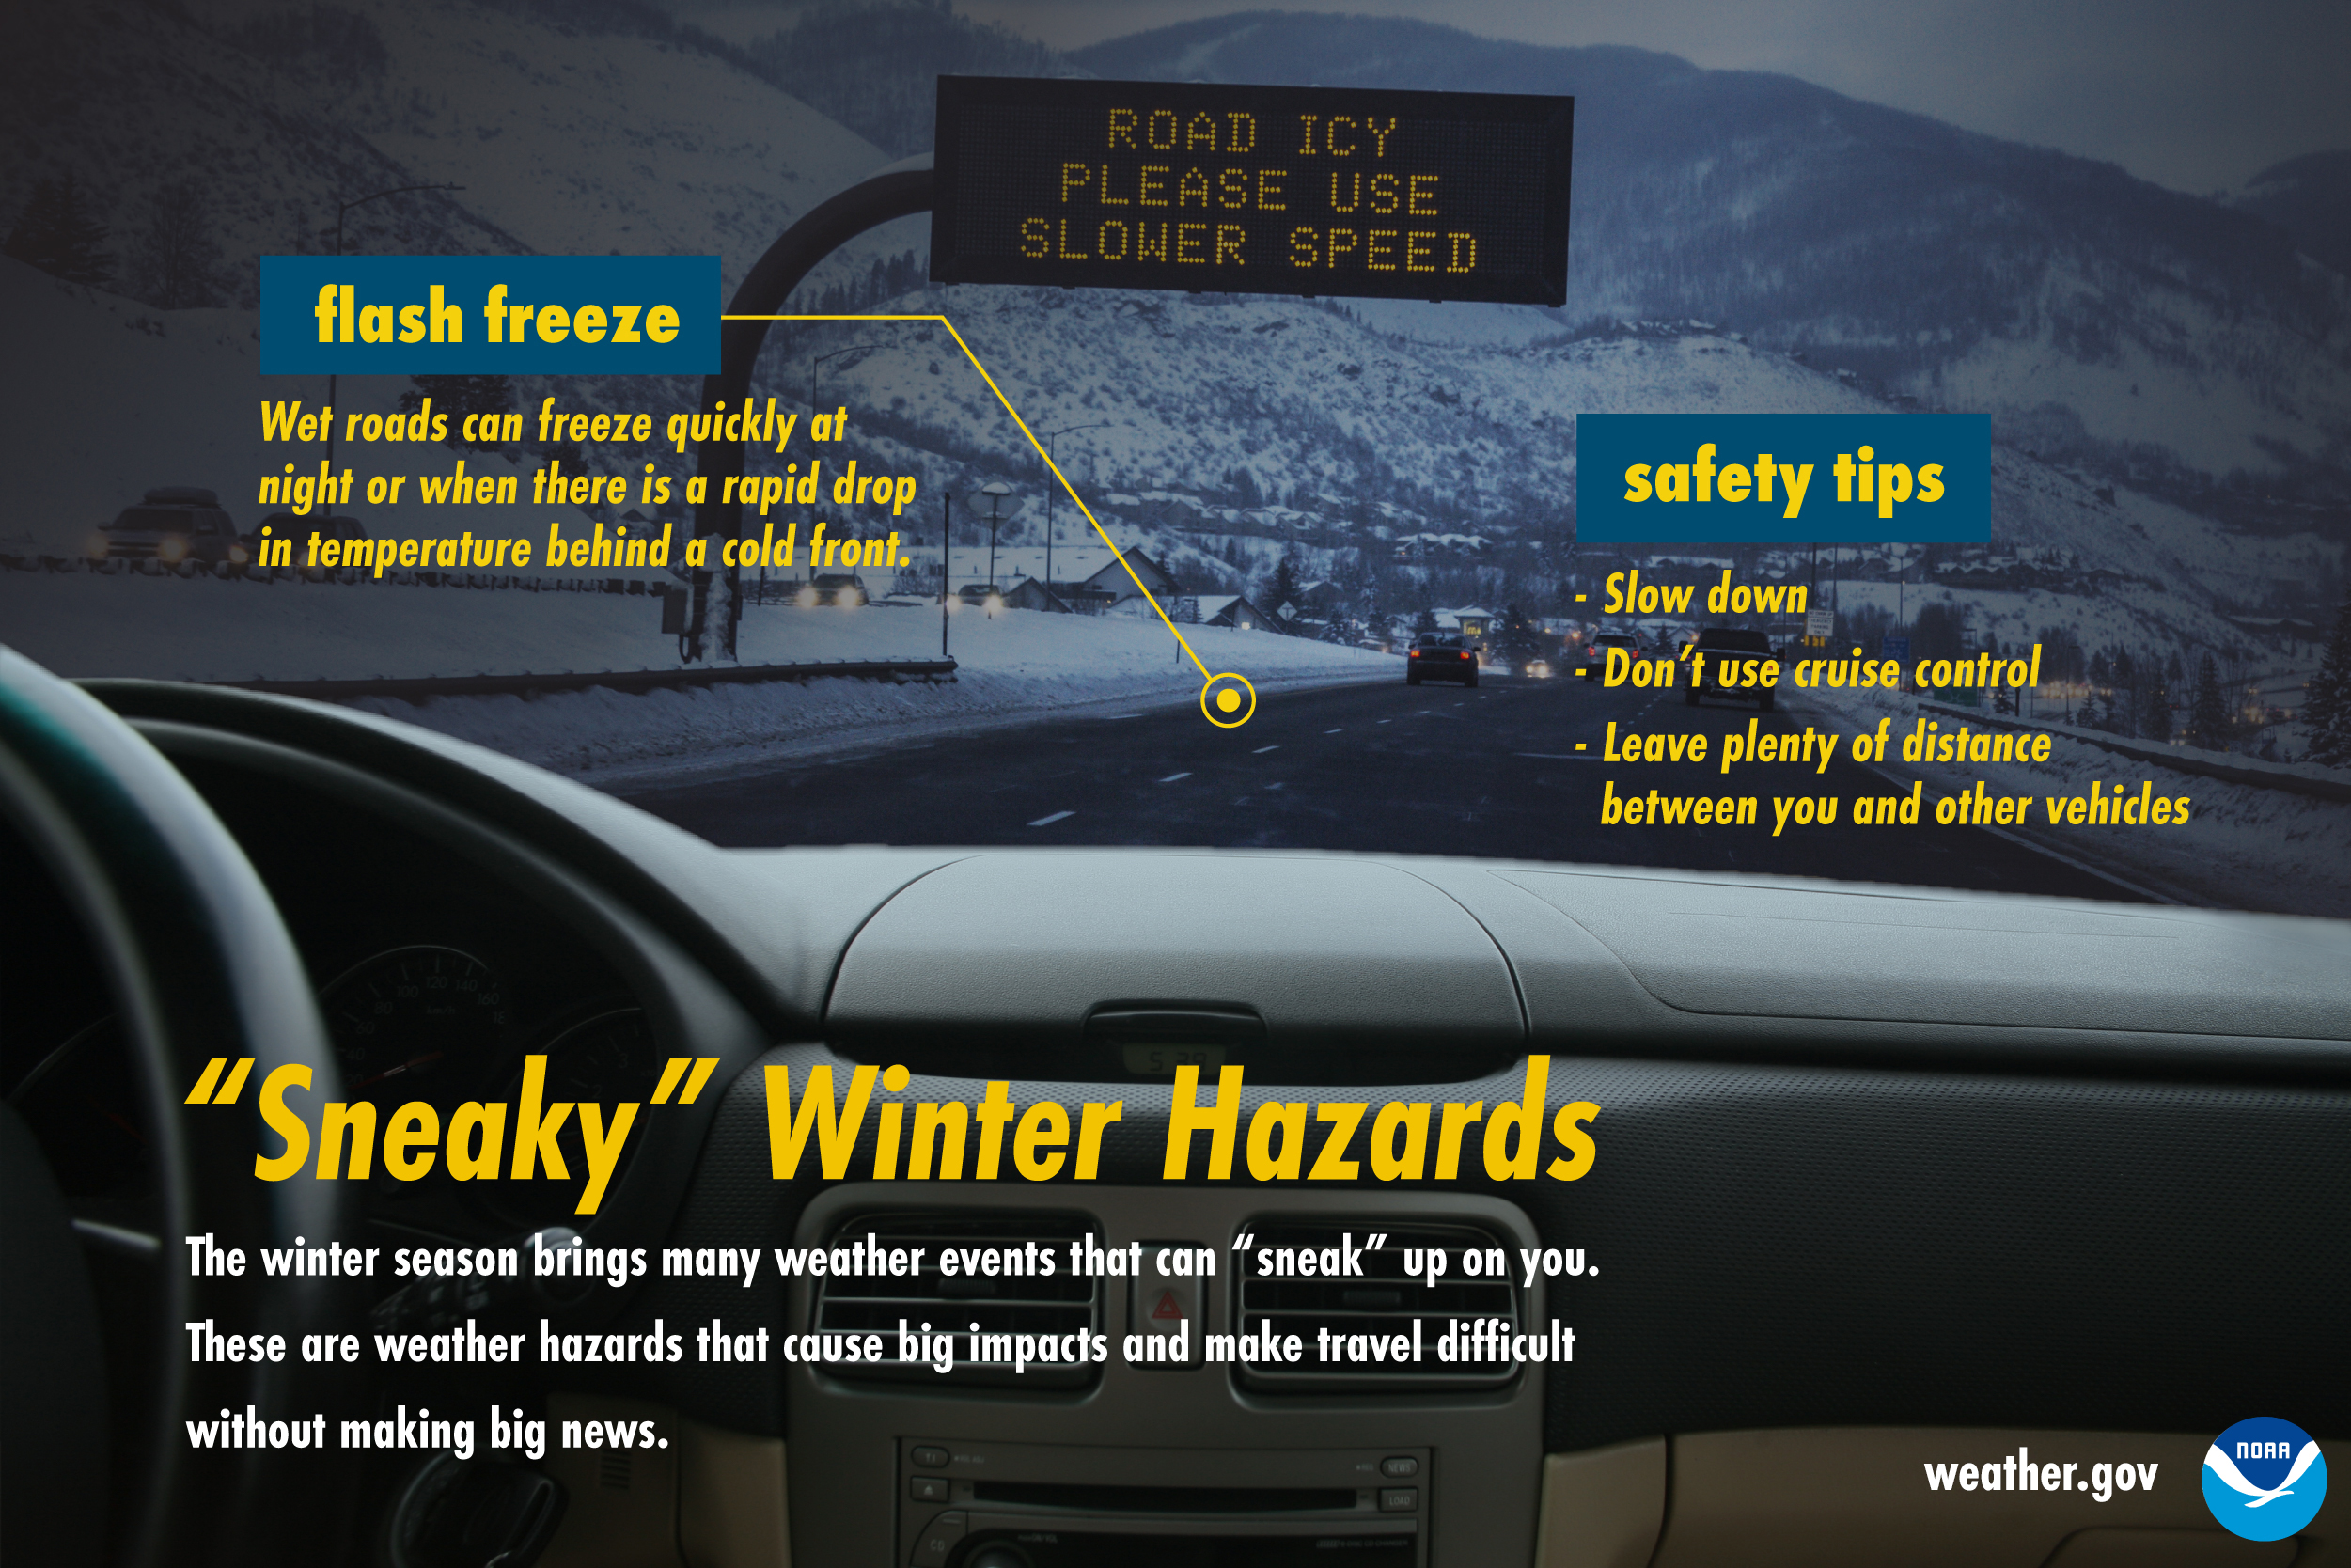 Sneaky Winter Hazards: Flash freeze. Wet roads can freeze quickly at night or when there is a rapid drop in temperature behind a cold front. Safety tips: slow down; don't use cruise control; leave plenty of distance between you and other vehicles.